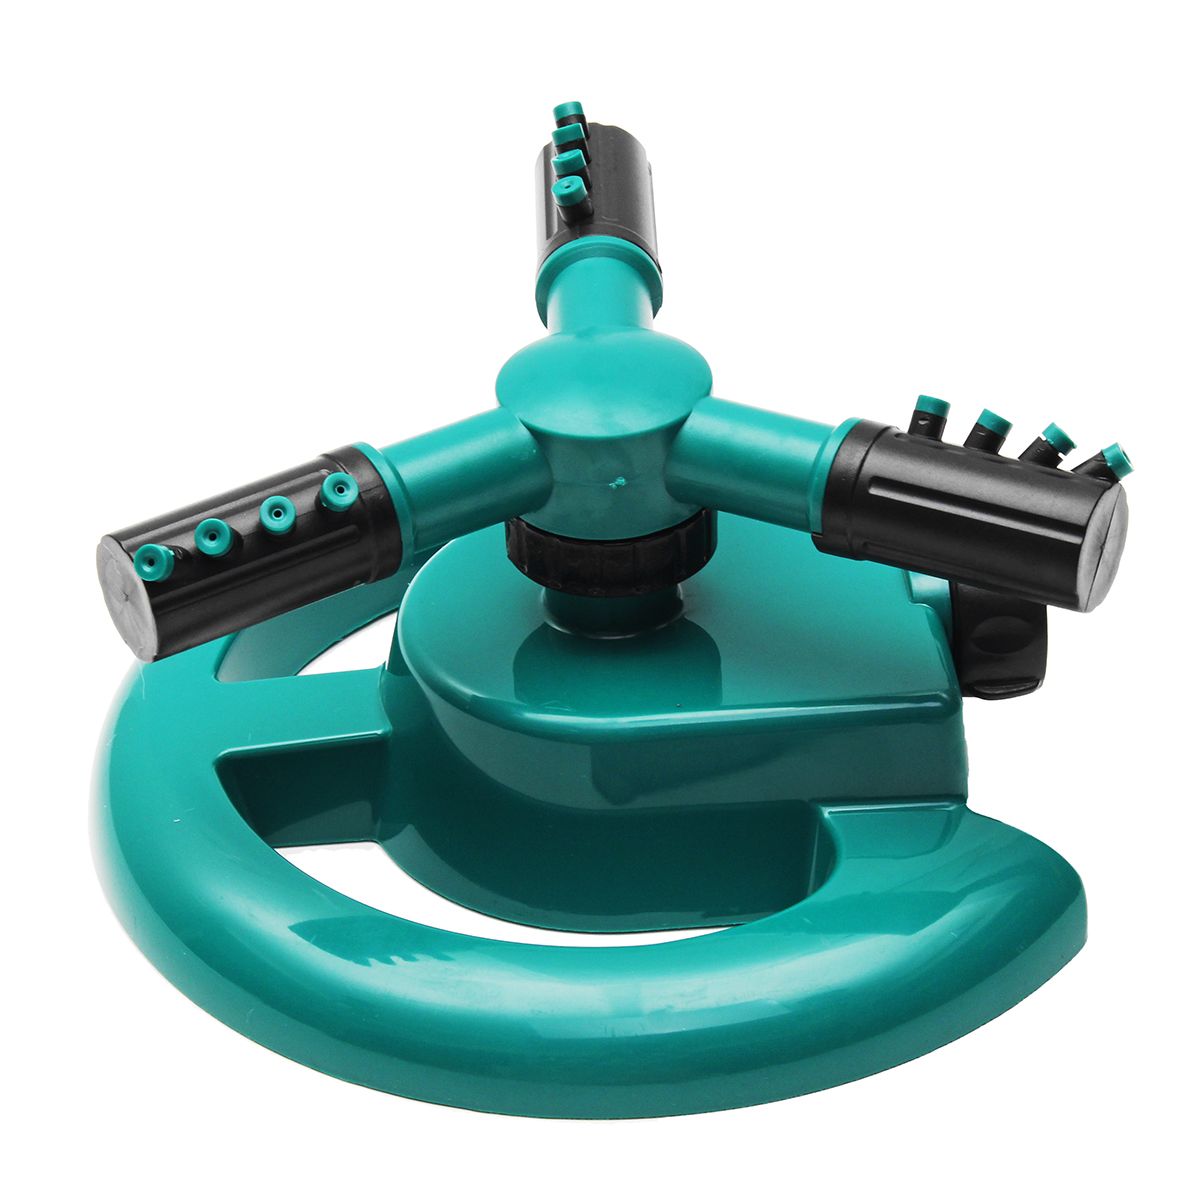 360-Degree-Automatic-Rotating-Watering-Revolving-Sprinkler-3-Nozzle-Irrigation-System-Lawn-Watering-1342827